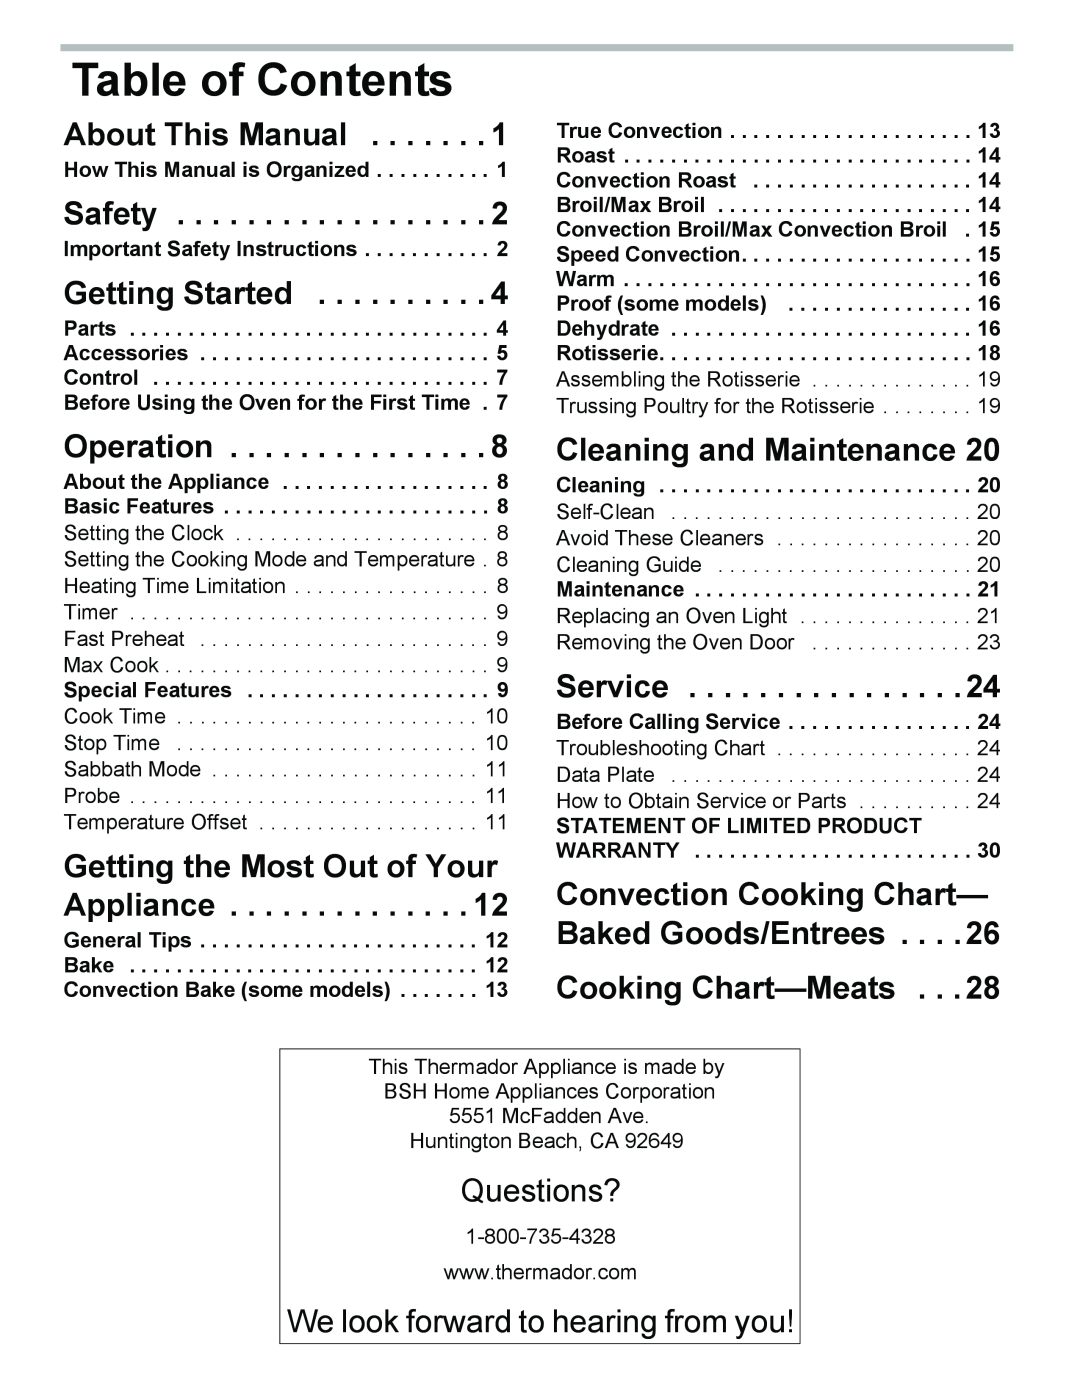 Thermador PODM301 manual Table of Contents, About This Manual, Safety, Getting Started, Operation, Cleaning and Maintenance 